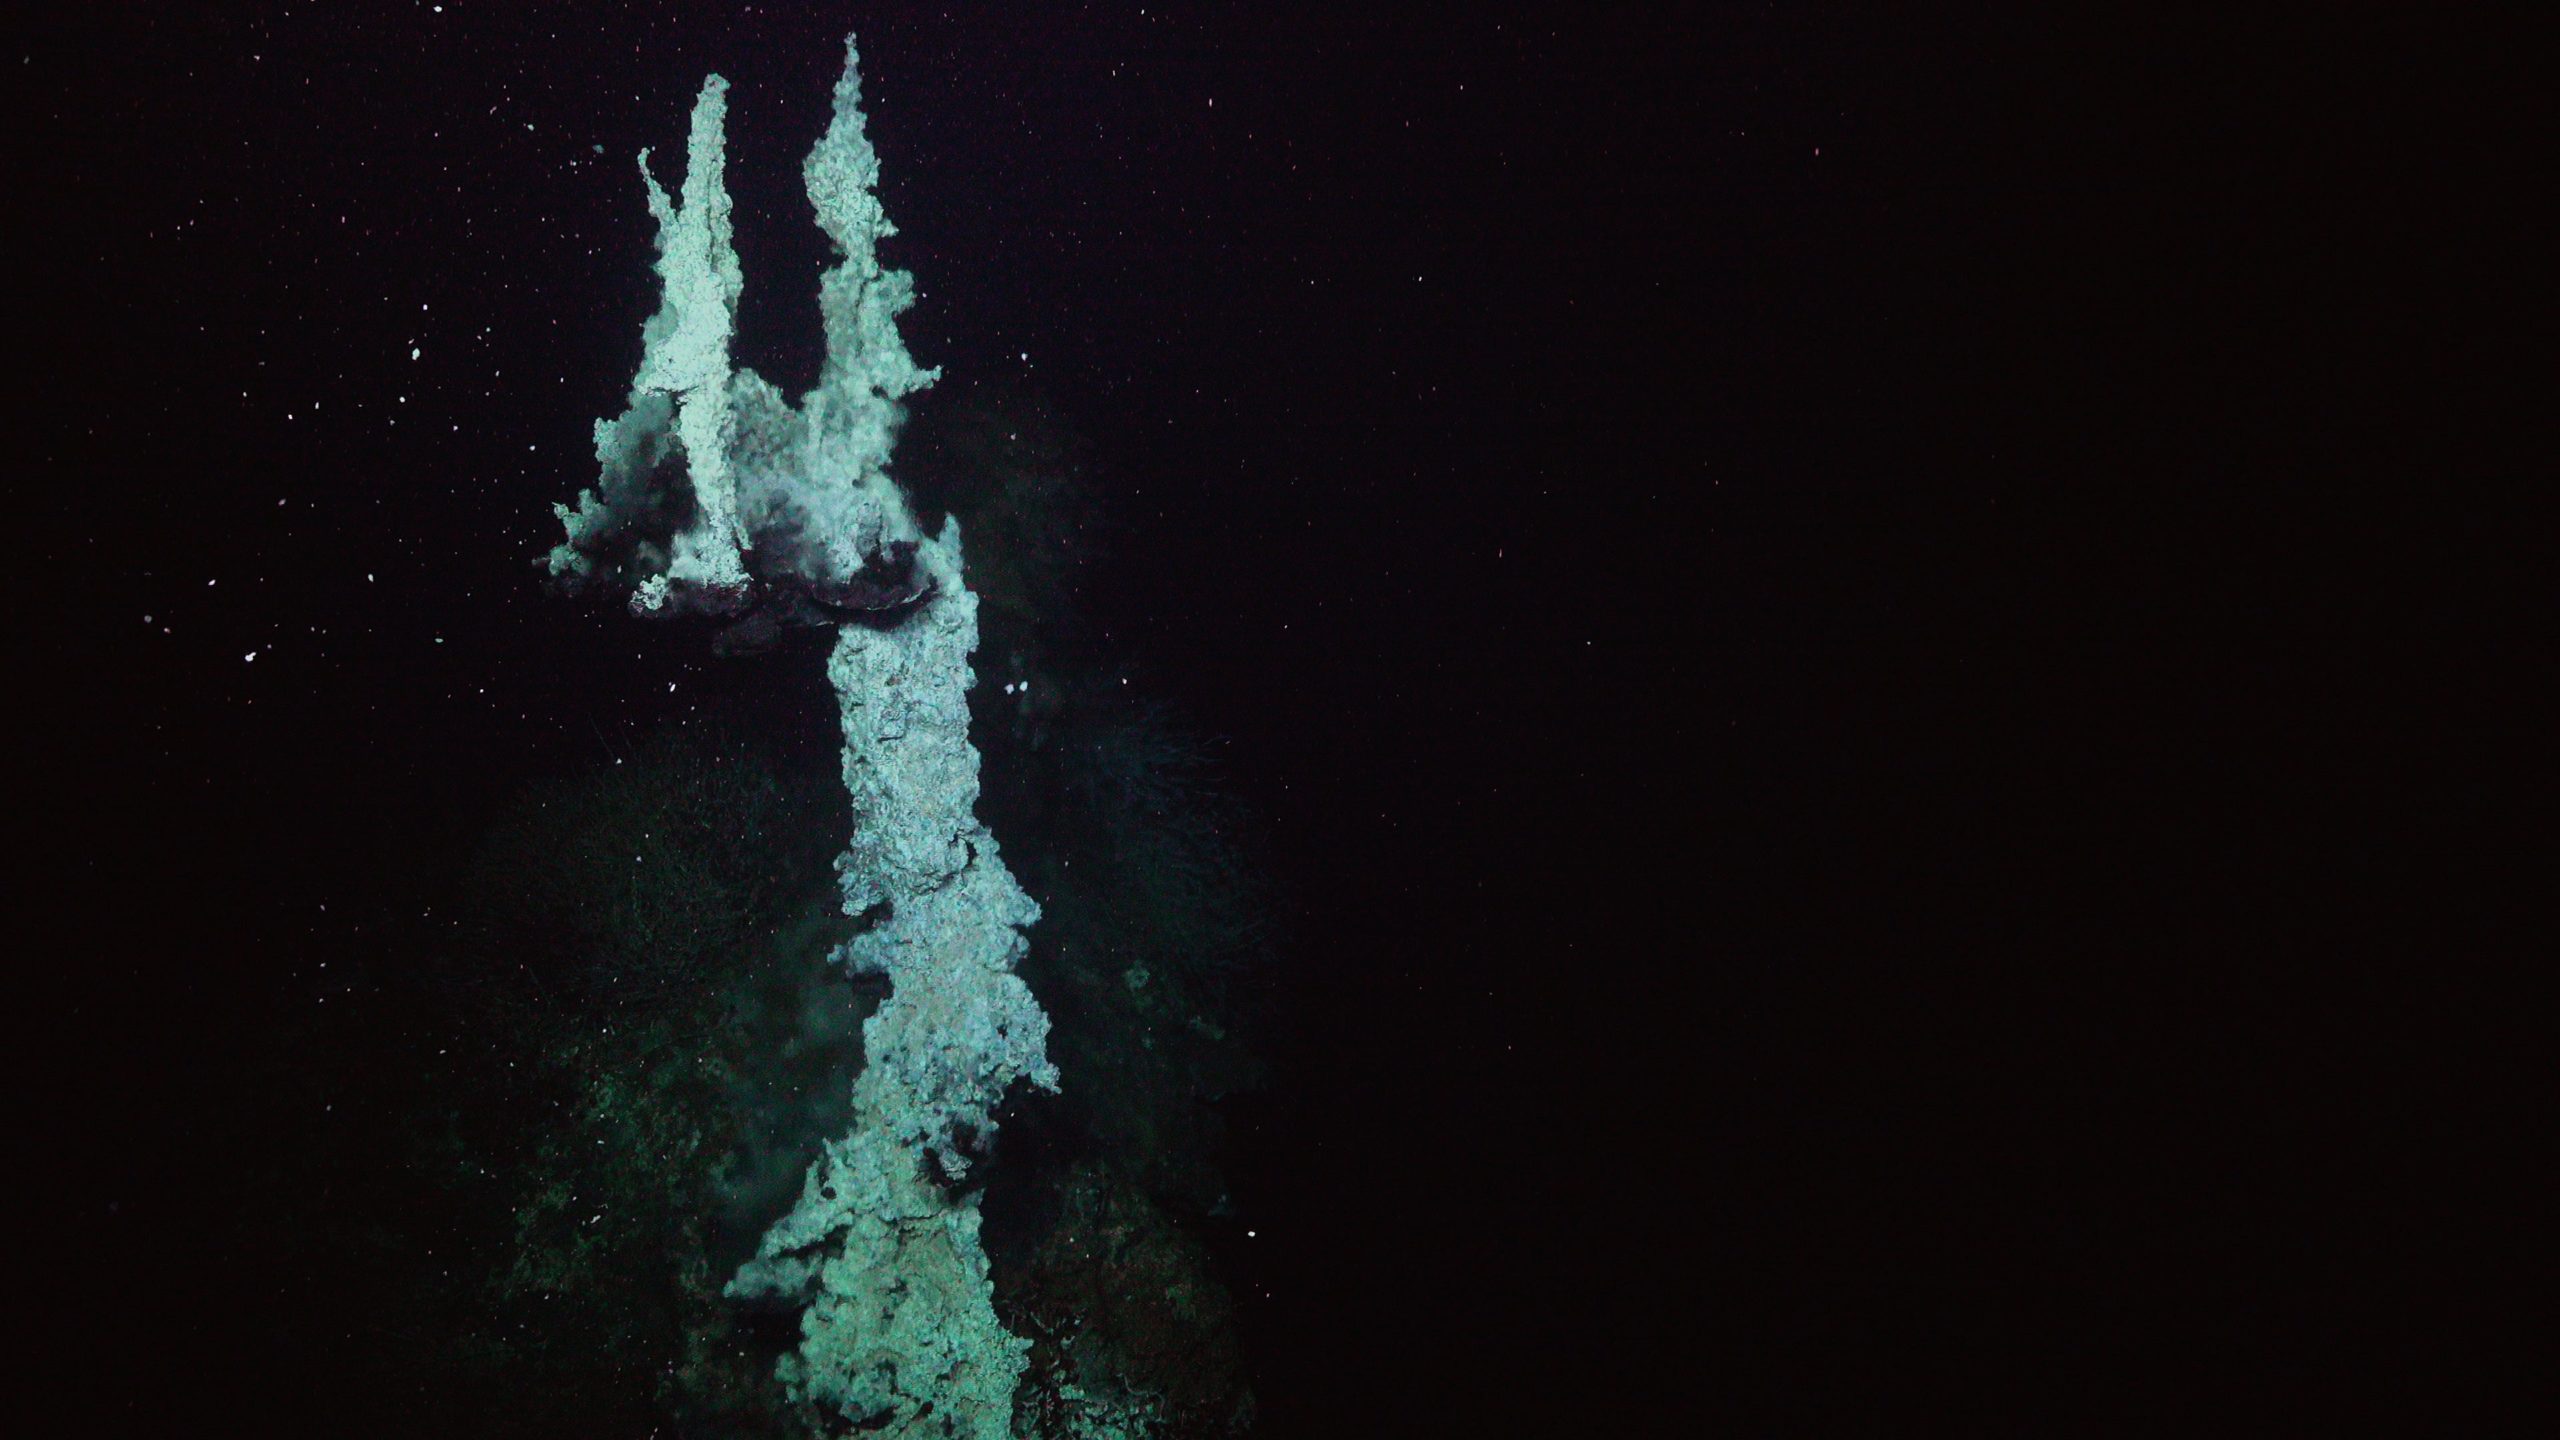 This chimney structure was formed by minerals precipitating from the hydrothermal fluids as they come in contact with the ocean's cold water, at a depth of 2.3 miles (3680 meters). (Photo: Schmidt Ocean Institute)